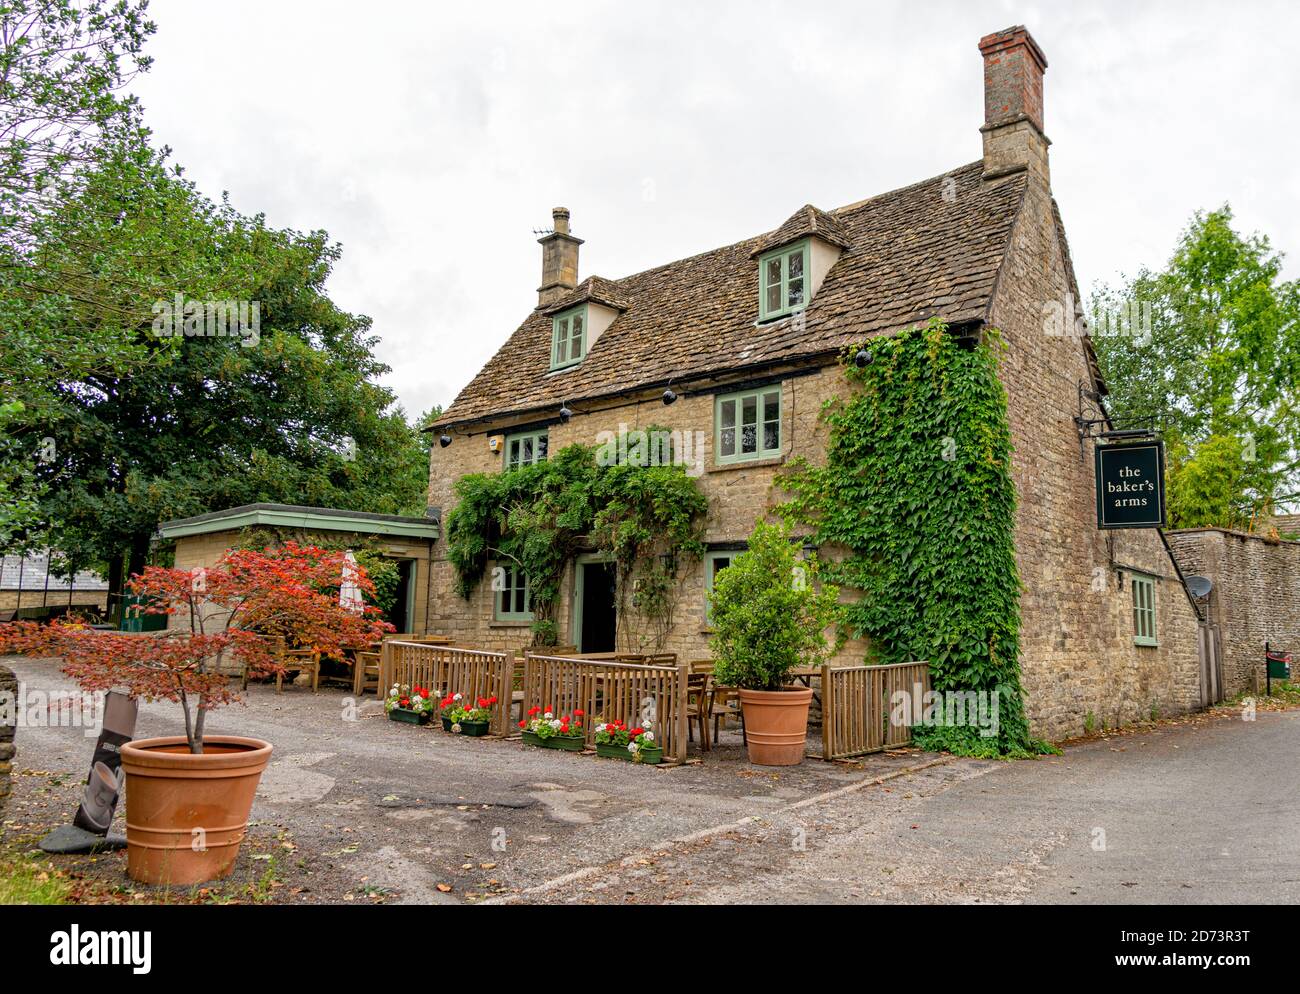 The Bakers Arms public house in Somerford Keynes in the Cotswolds Water Park, England, United kingdom Stock Photo